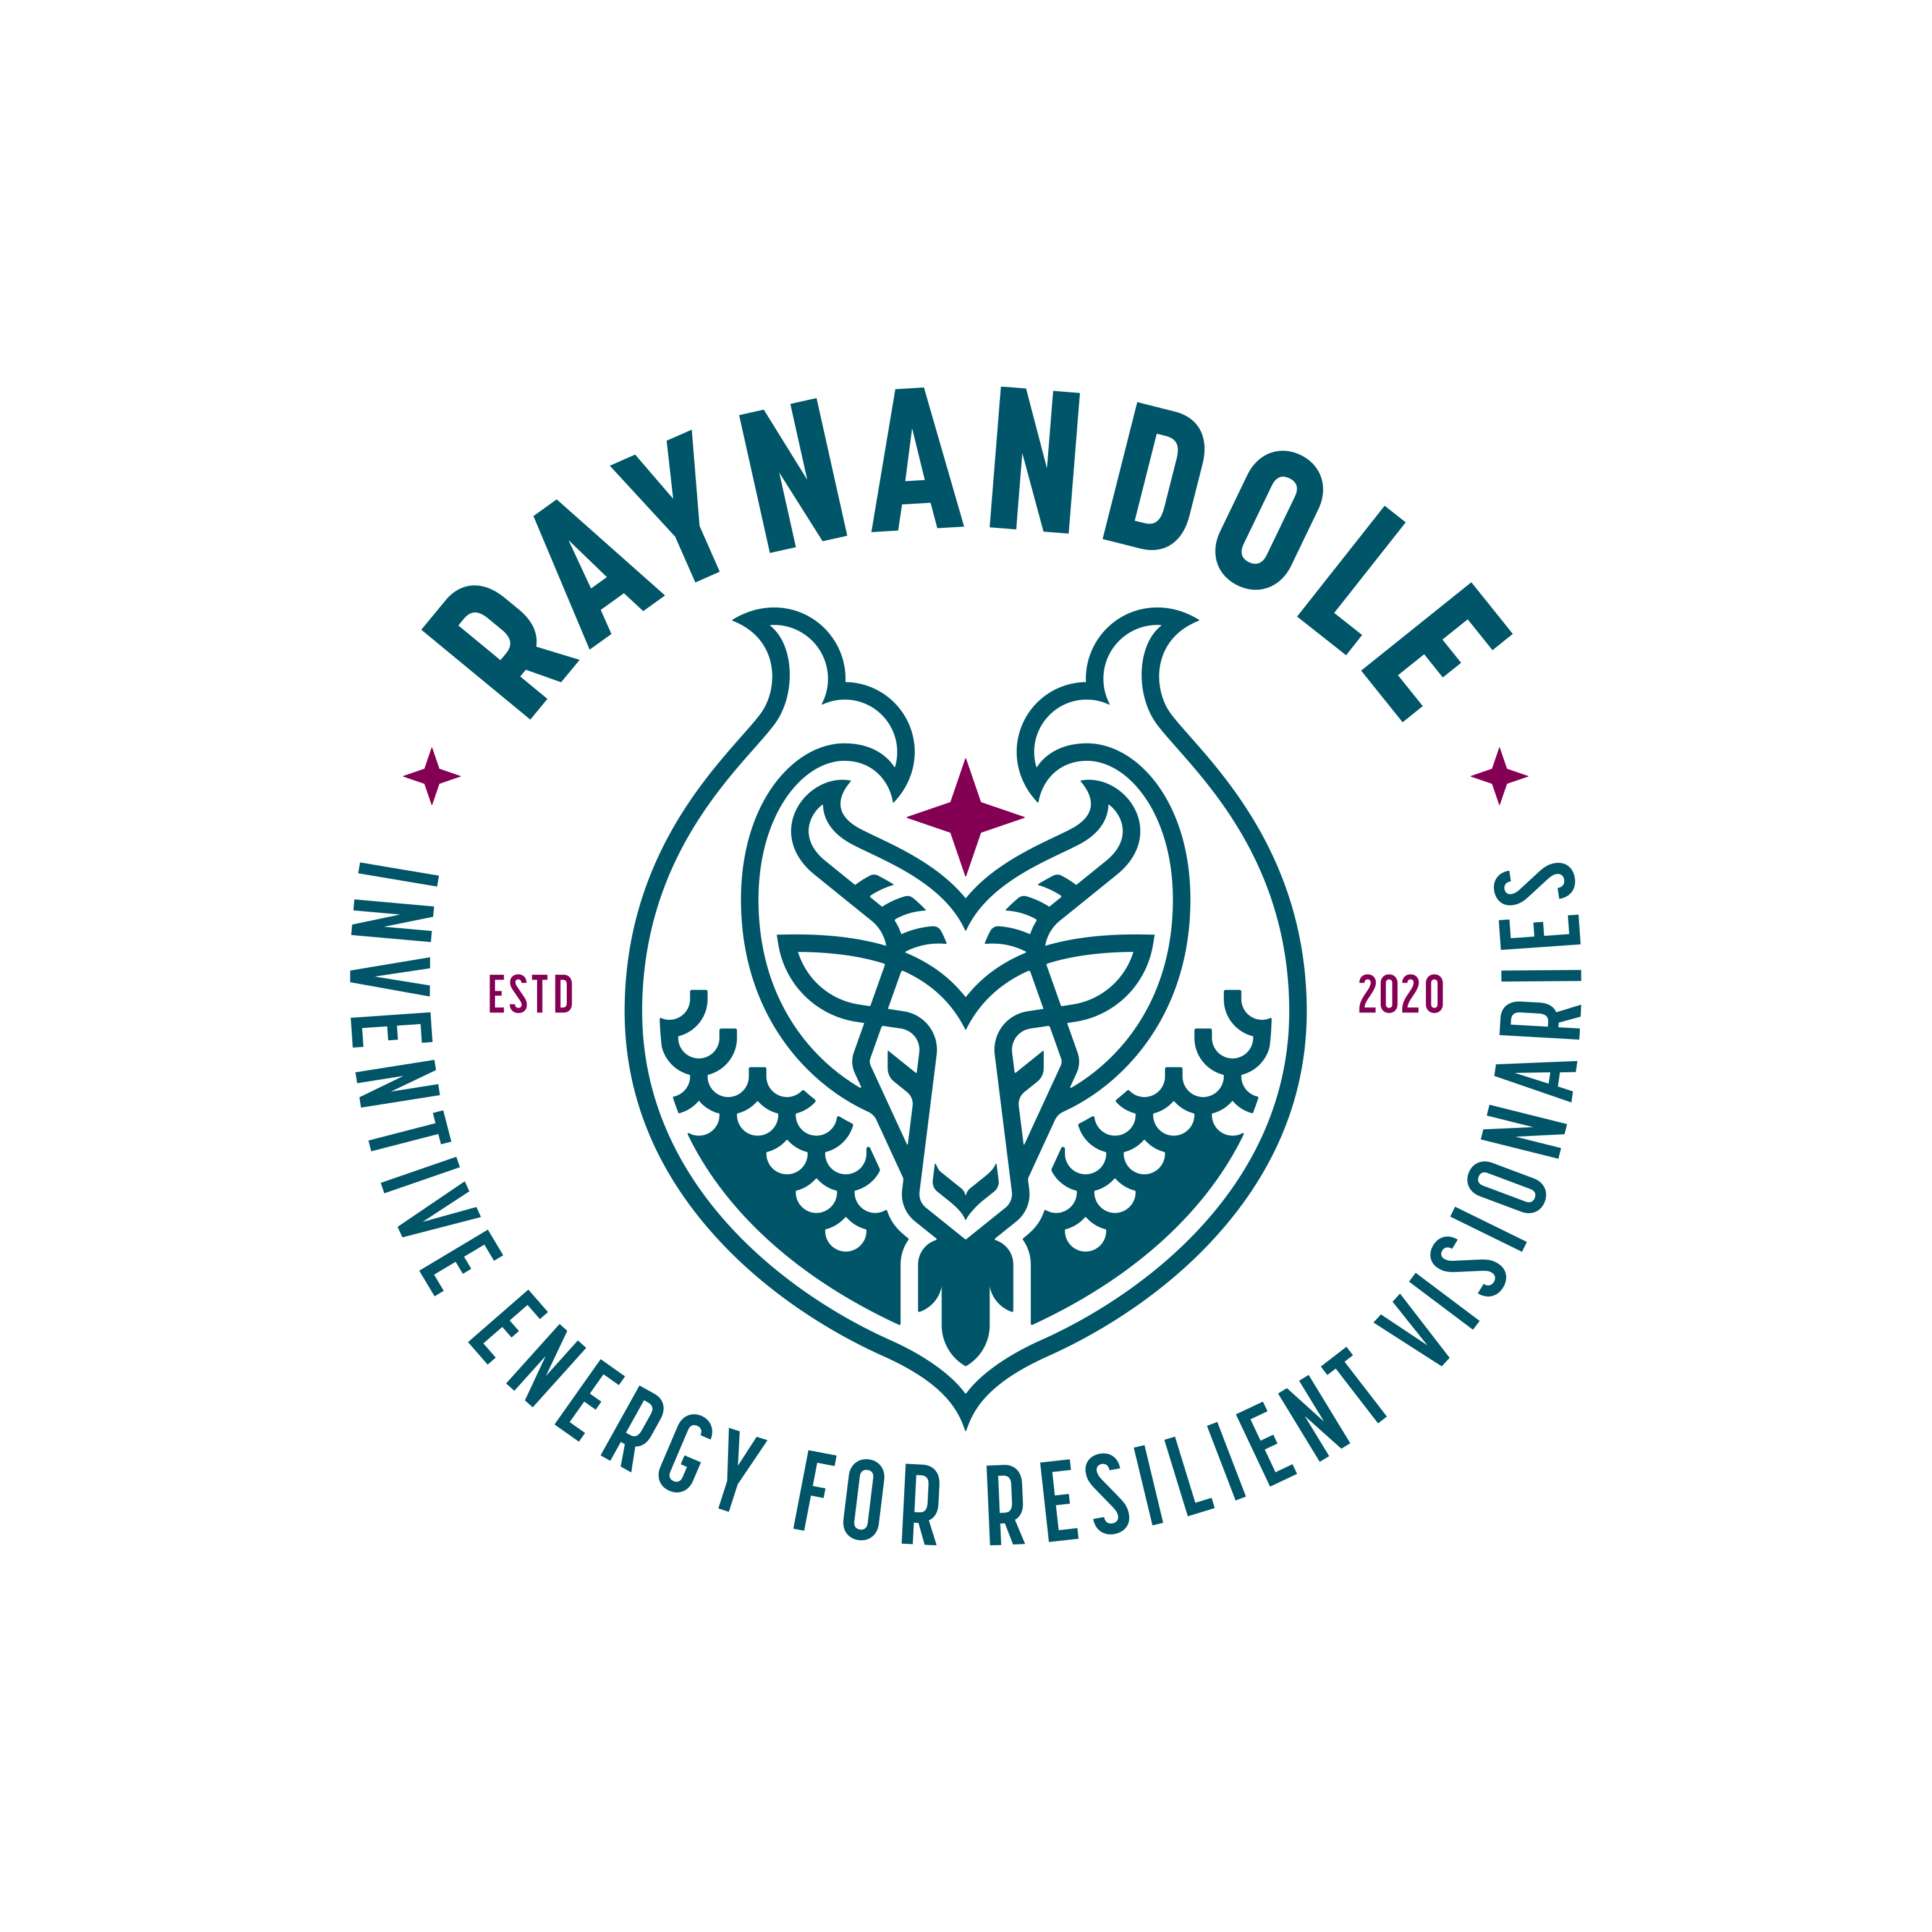 Raynandole logo design by logo designer Glitschka Studios for your inspiration and for the worlds largest logo competition